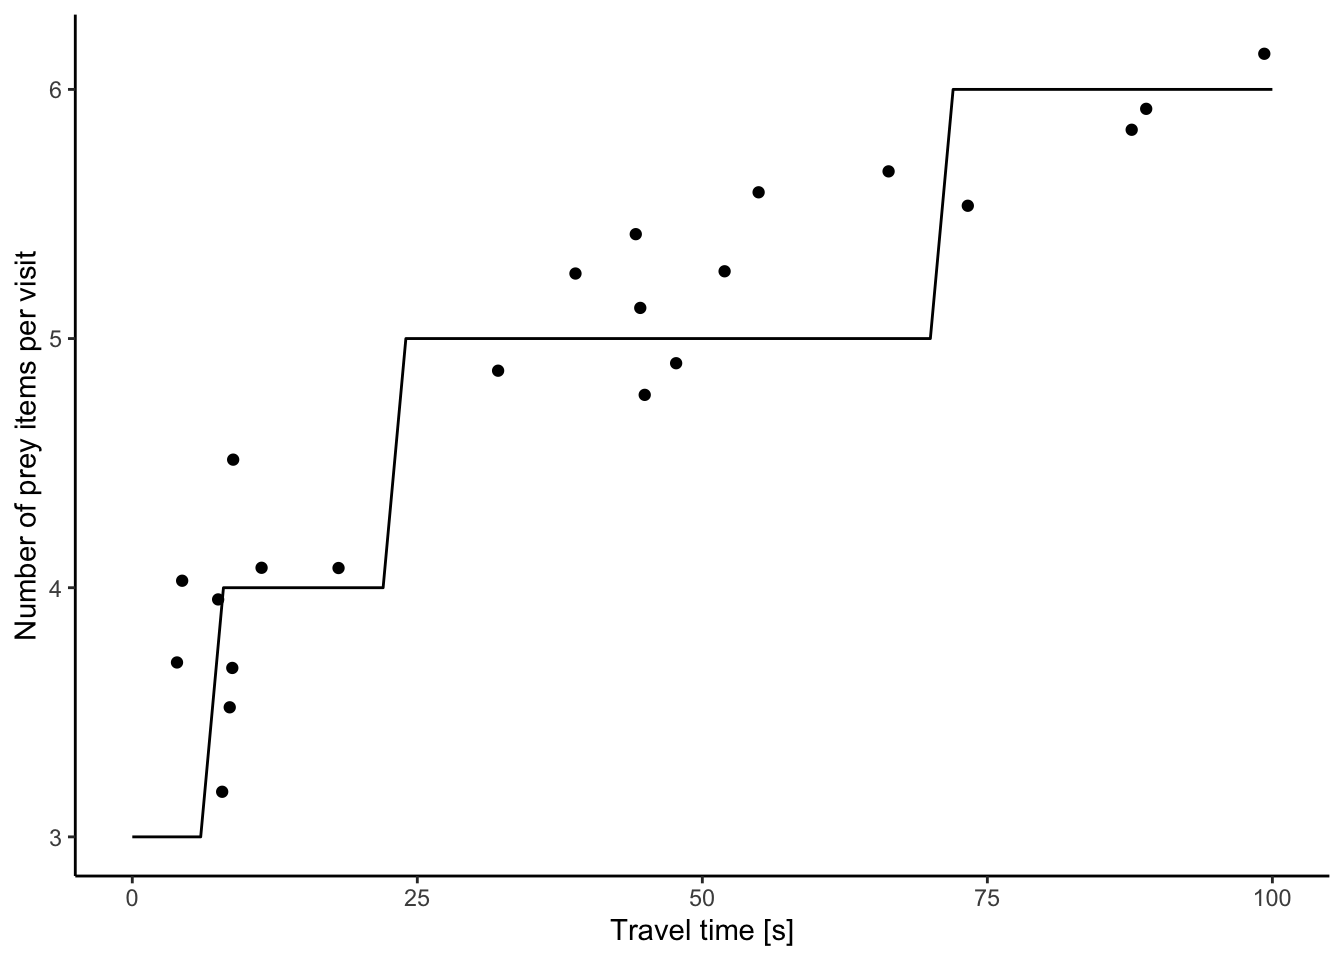 Number of prey items collected by starlings as a function of travel time between food patches. The black like represents the theoretical prediction derived from the marginal value theorem in Figure 9.6. [Data](data/9_opt_foraging.csv) from Kacelnik (1984).